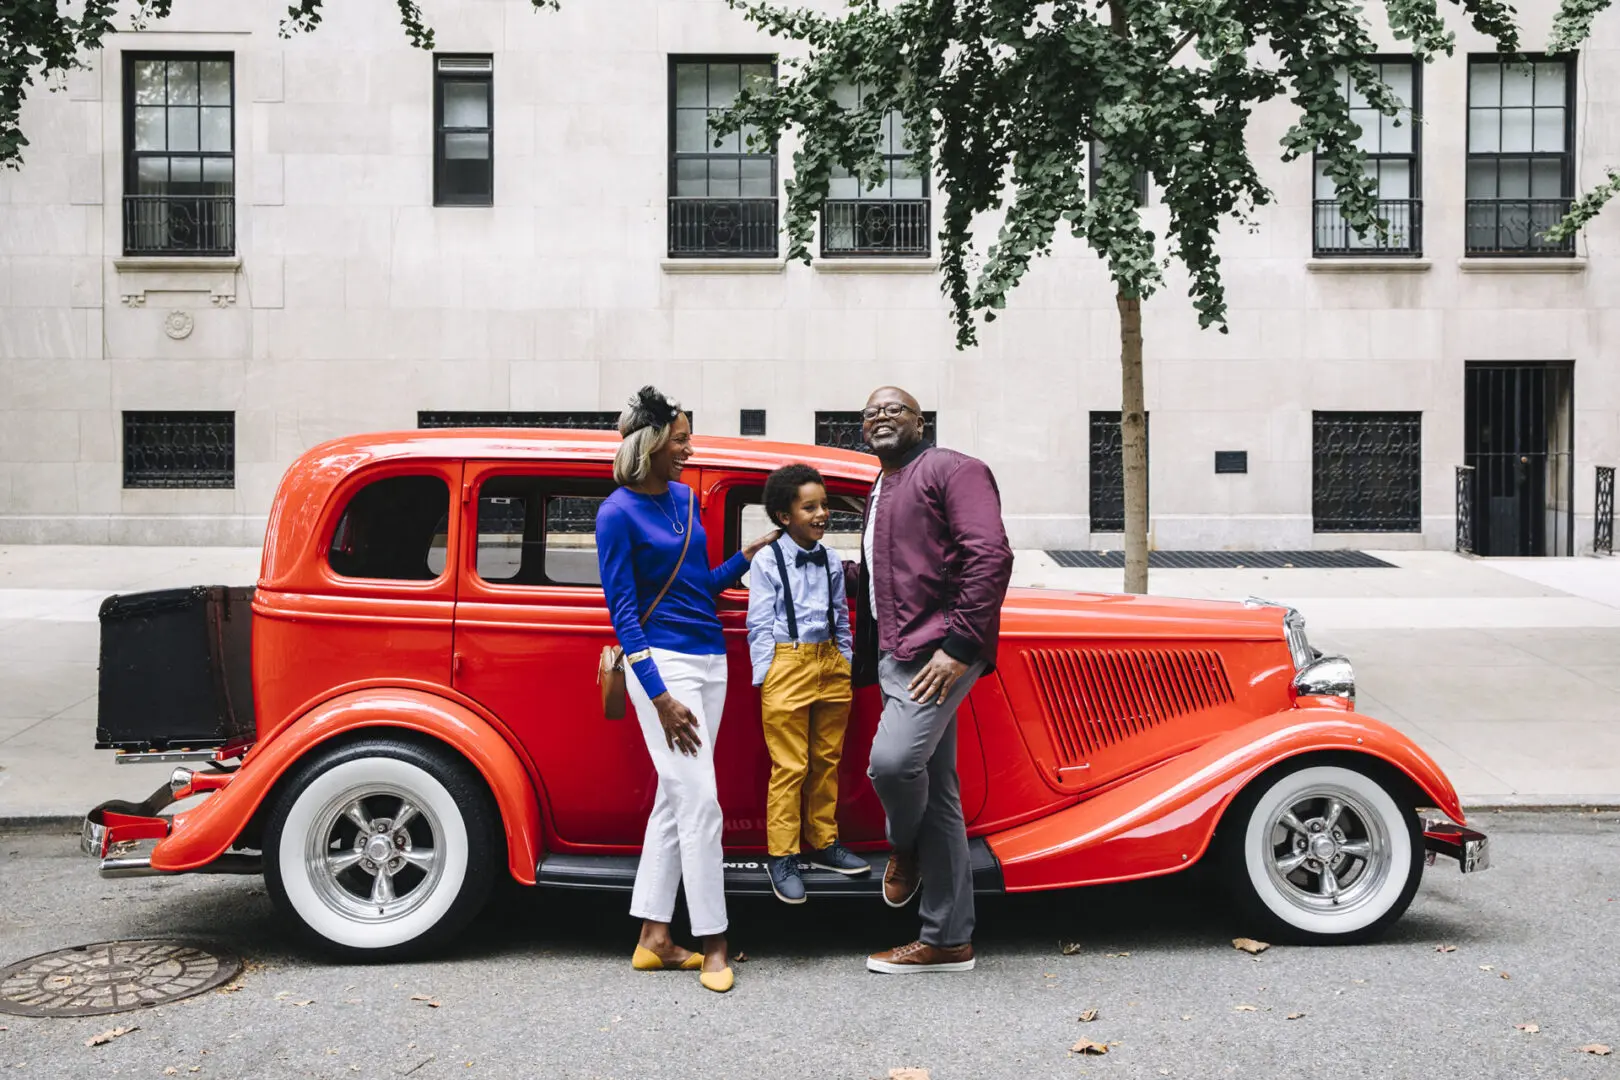 A family dressed in luxury, stylish attire standing next to a classic red car on a city street.